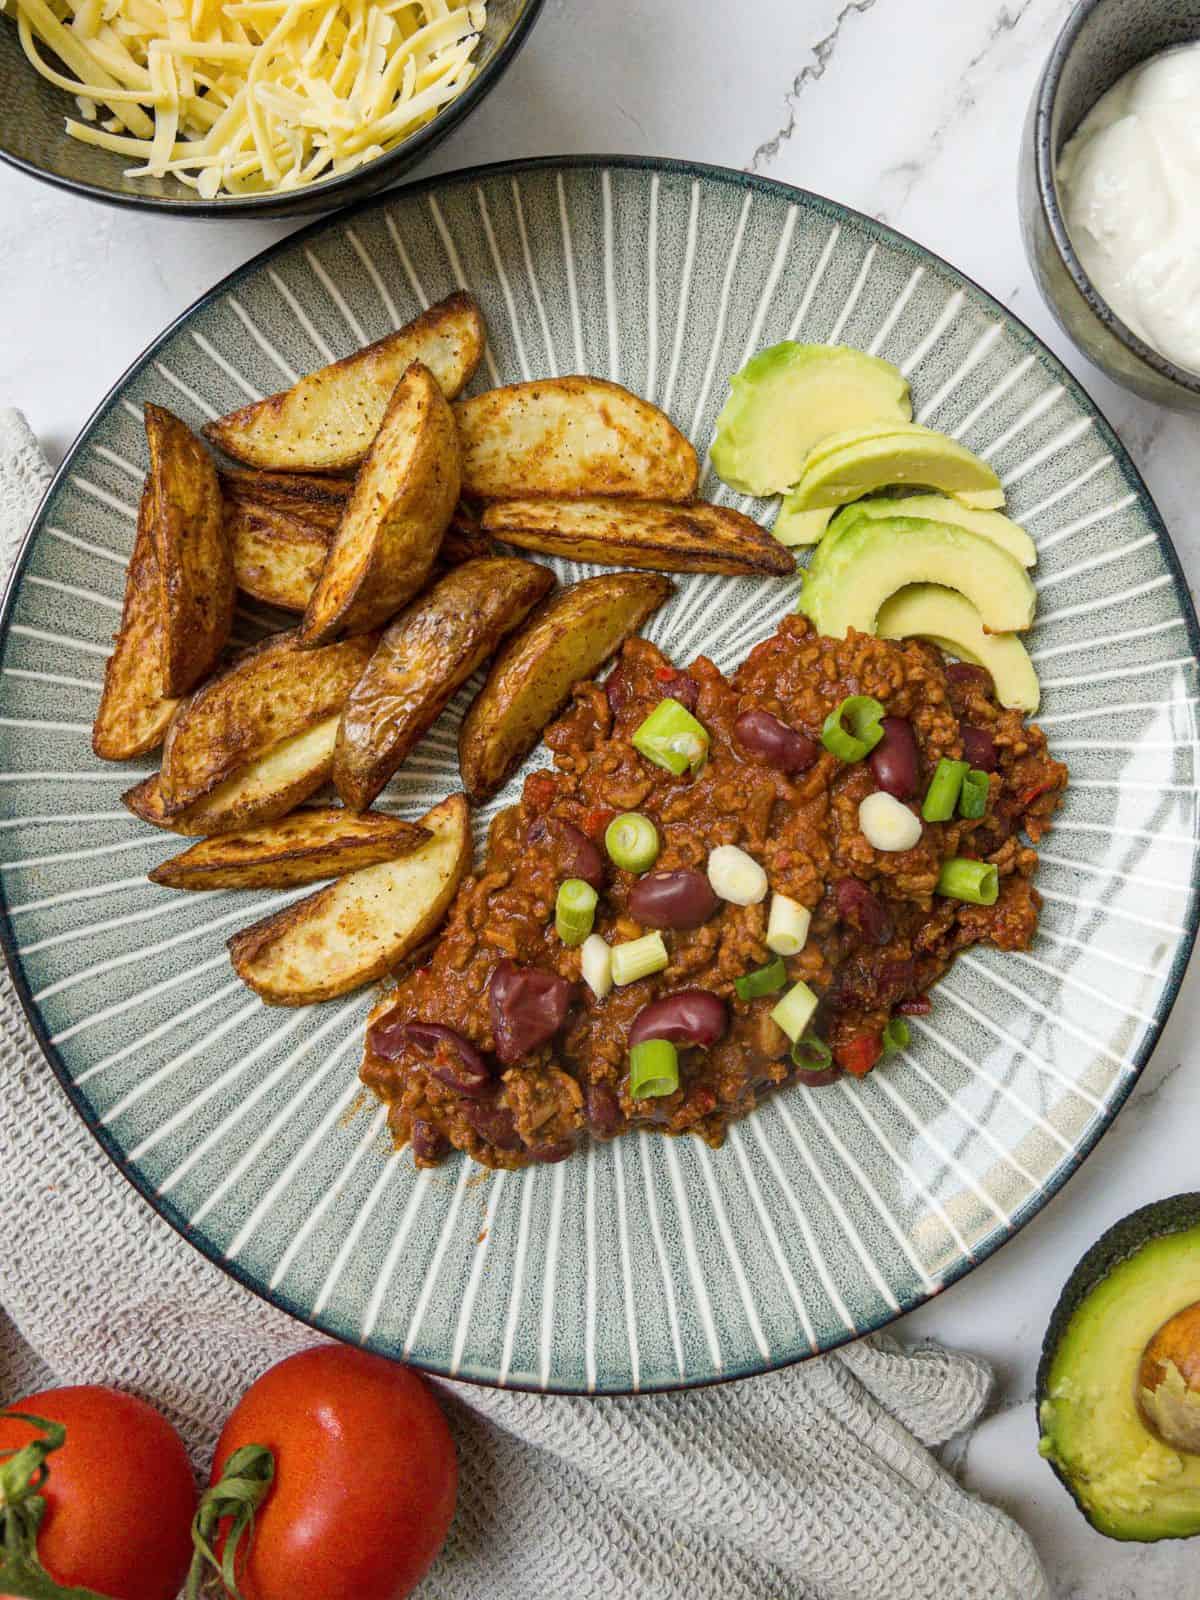 A blue plate containing chilli con carne, potato wedges and avocado. In the background are some tomatoes, avocado, a pot of cheese and a pot of sour cream.